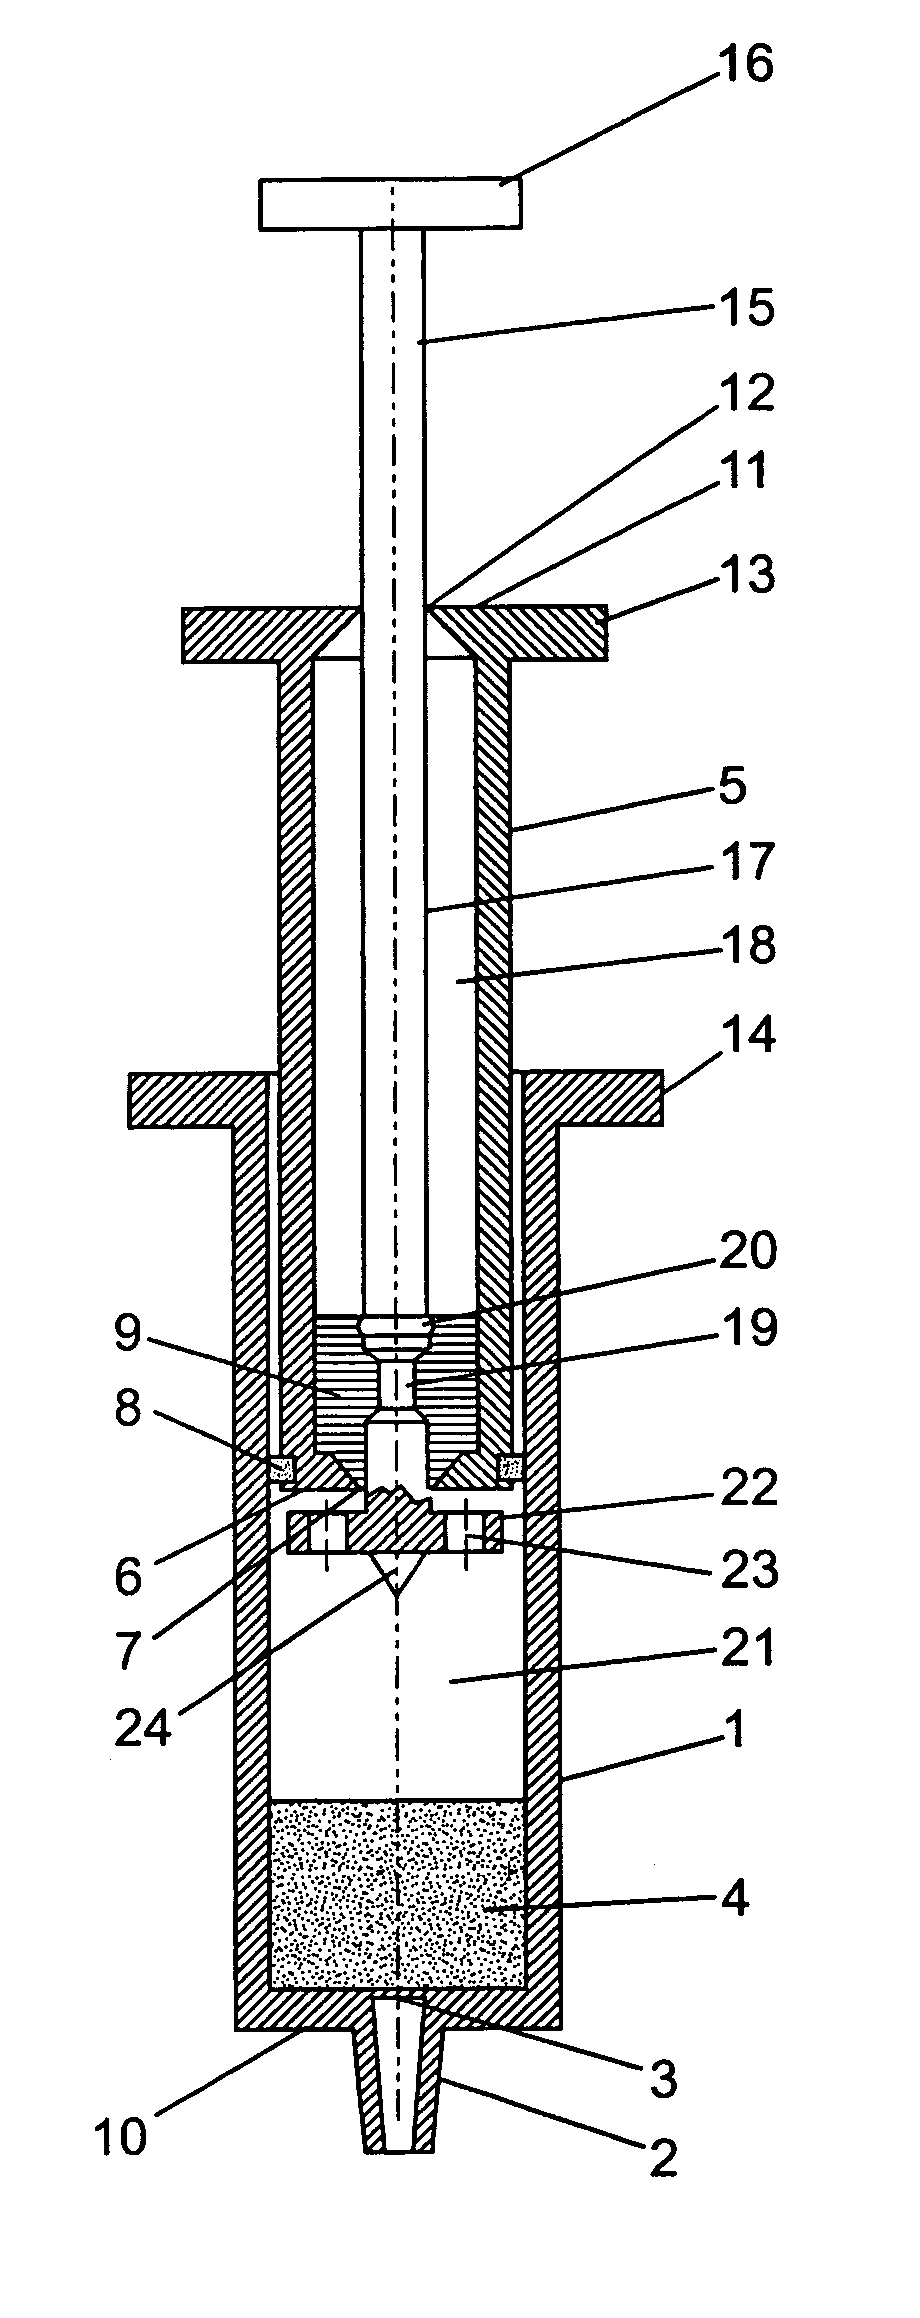 Apparatus and methods for mixing two components